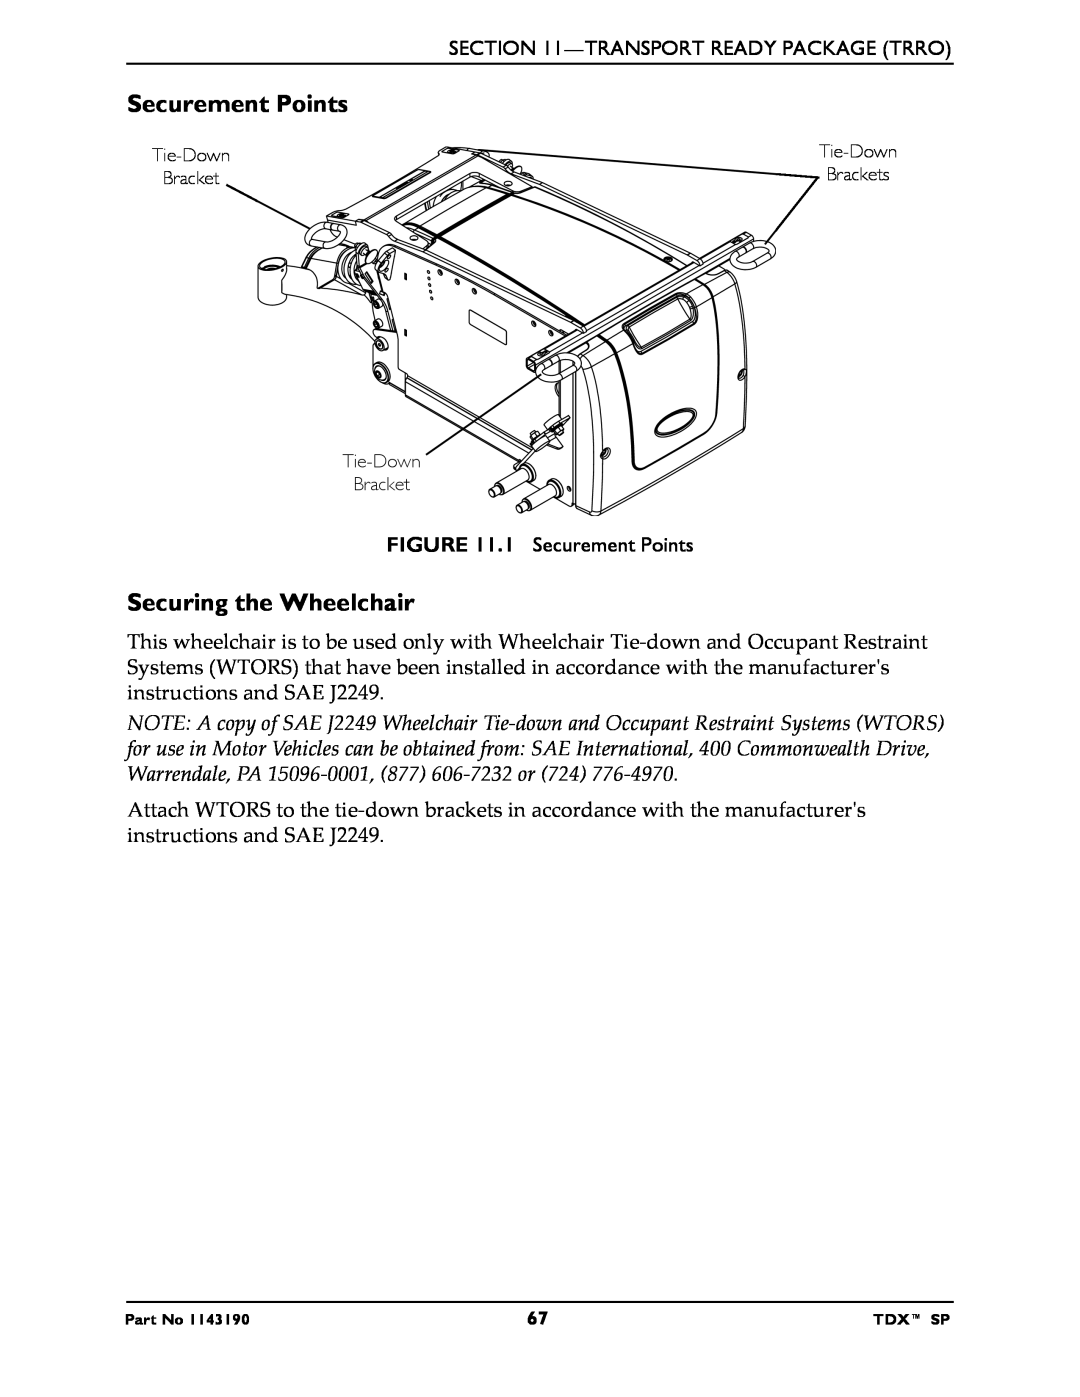 Invacare SP manual Securing the Wheelchair, 1 Securement Points 